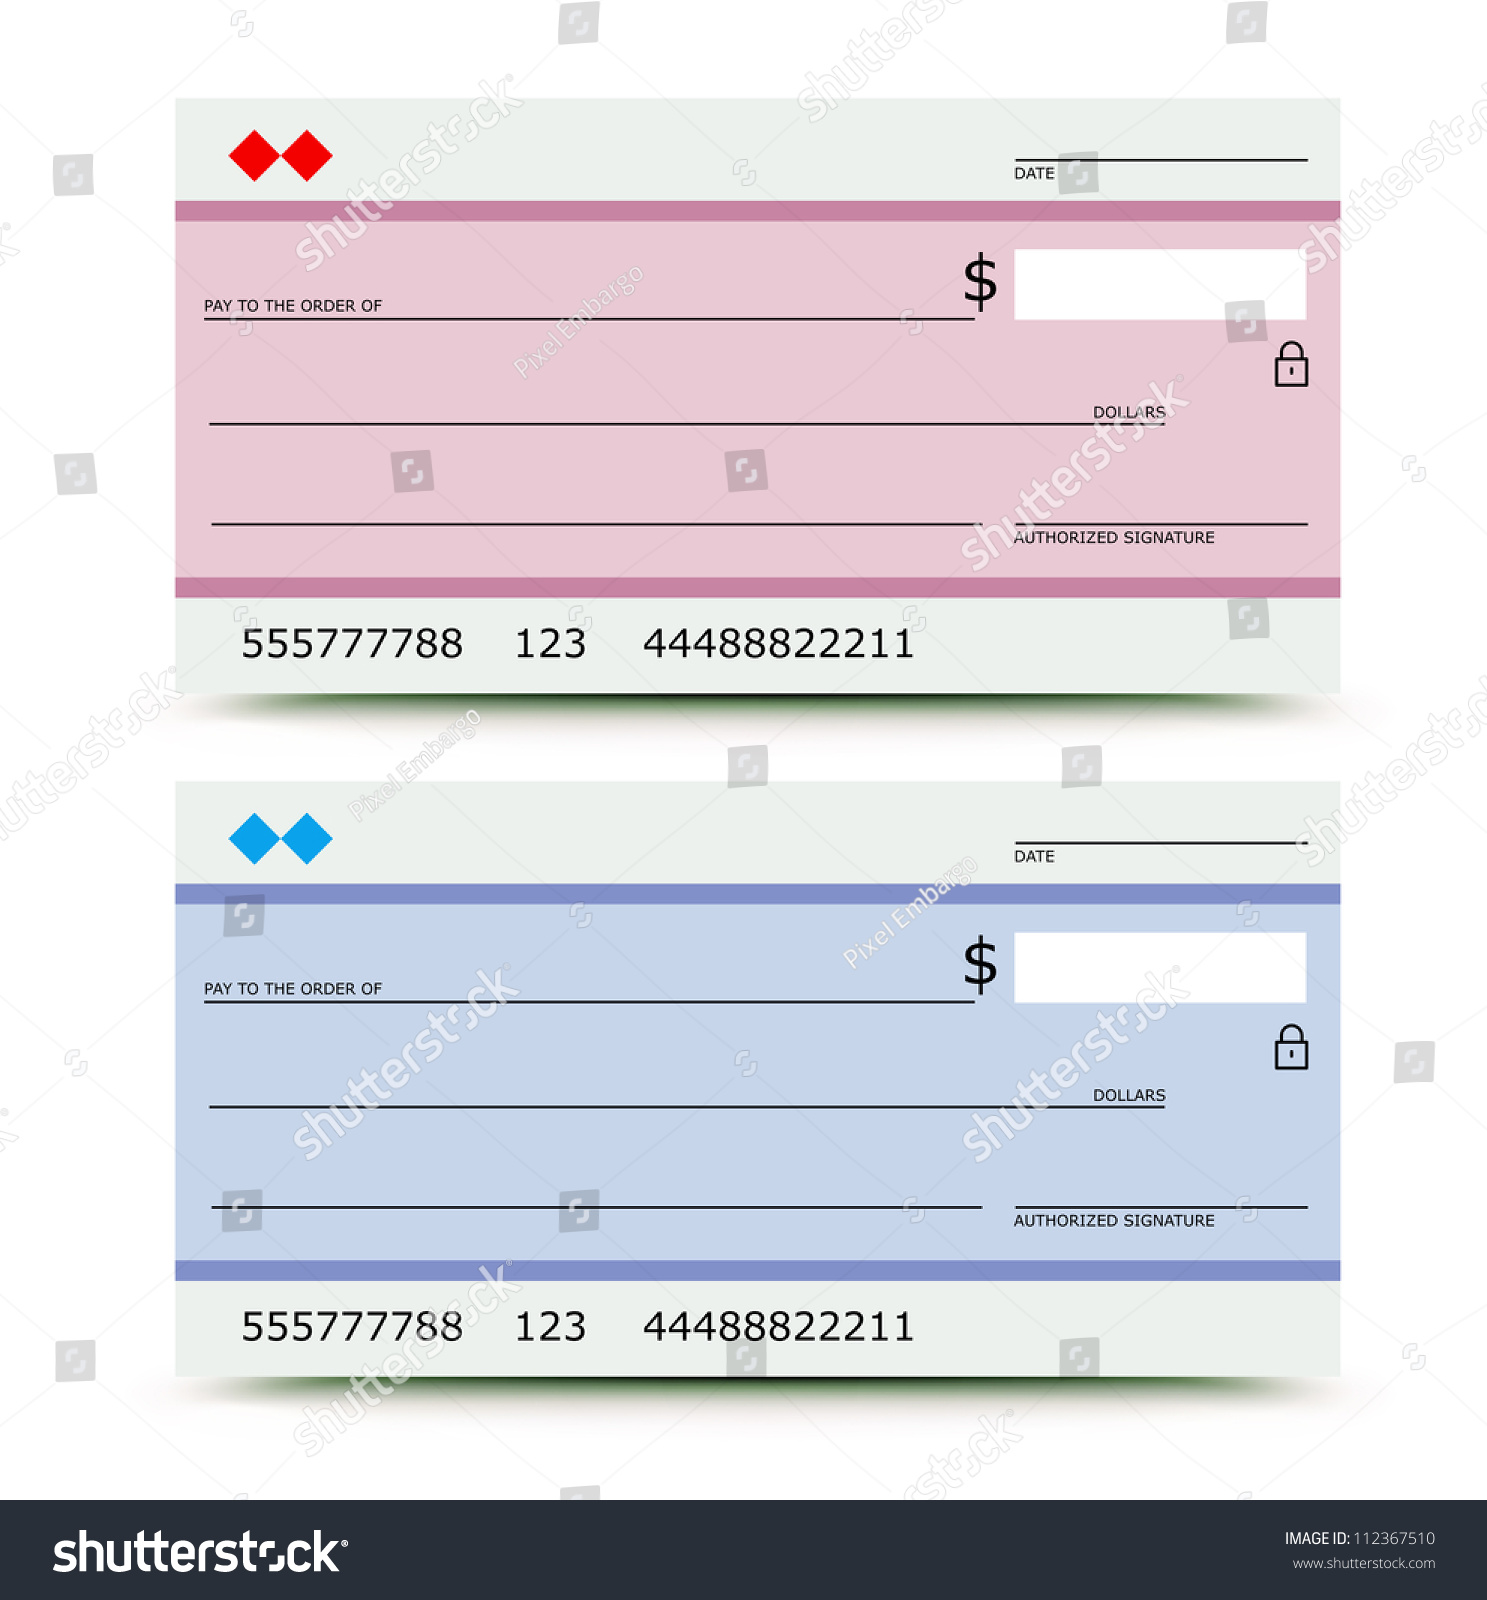 Vector Illustration Of Bank Check In Two Variations - Pink And Blue ...